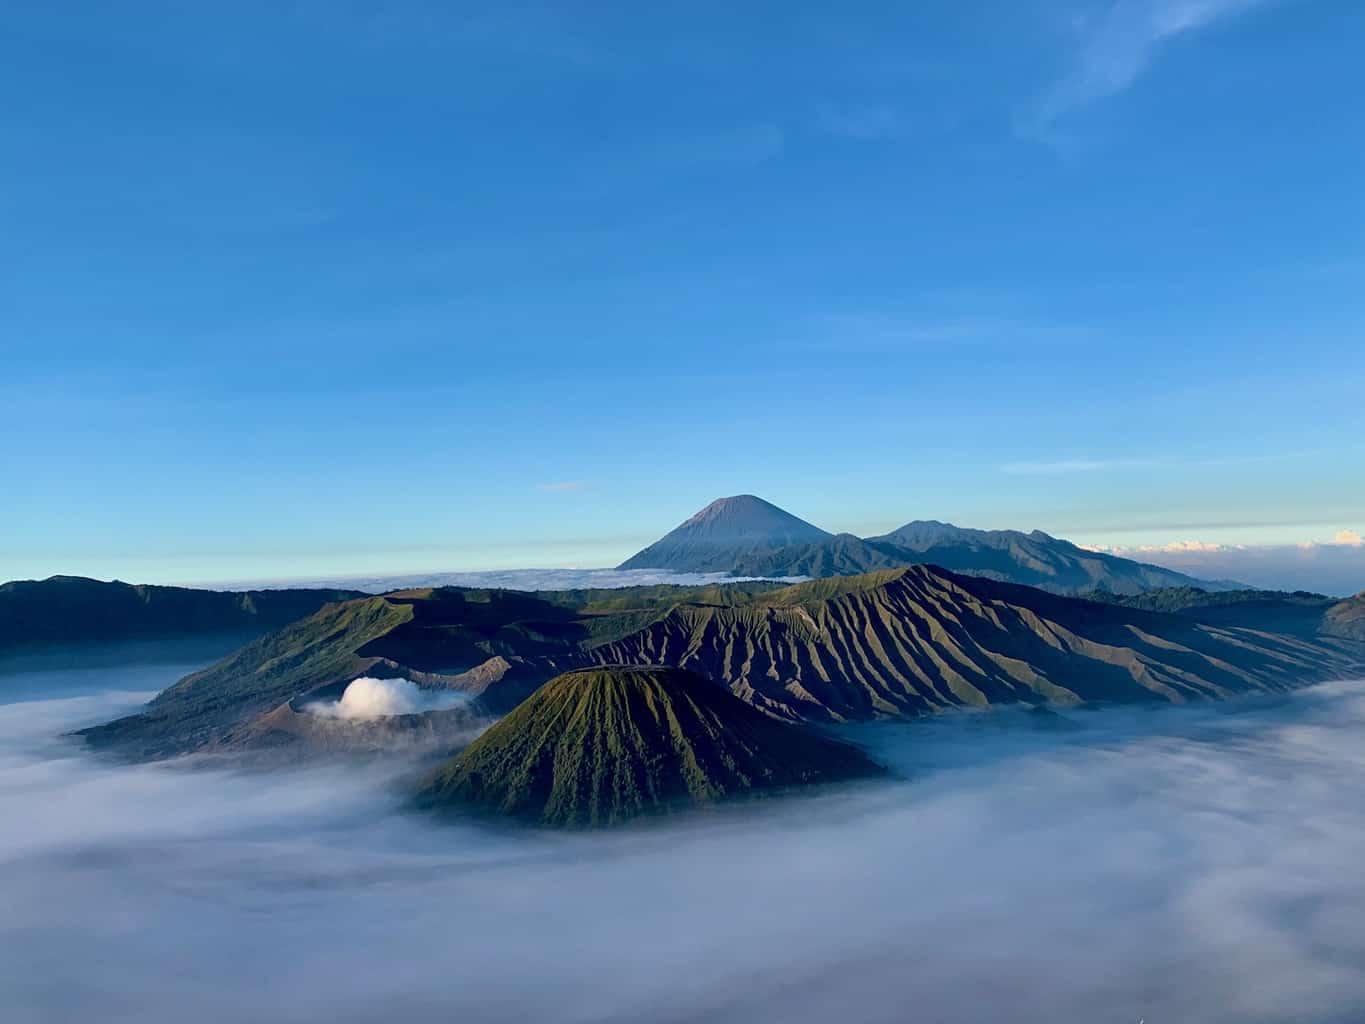 A DIY Overview to Hike Mount Bromo | Sunrise, Viewpoints, & More